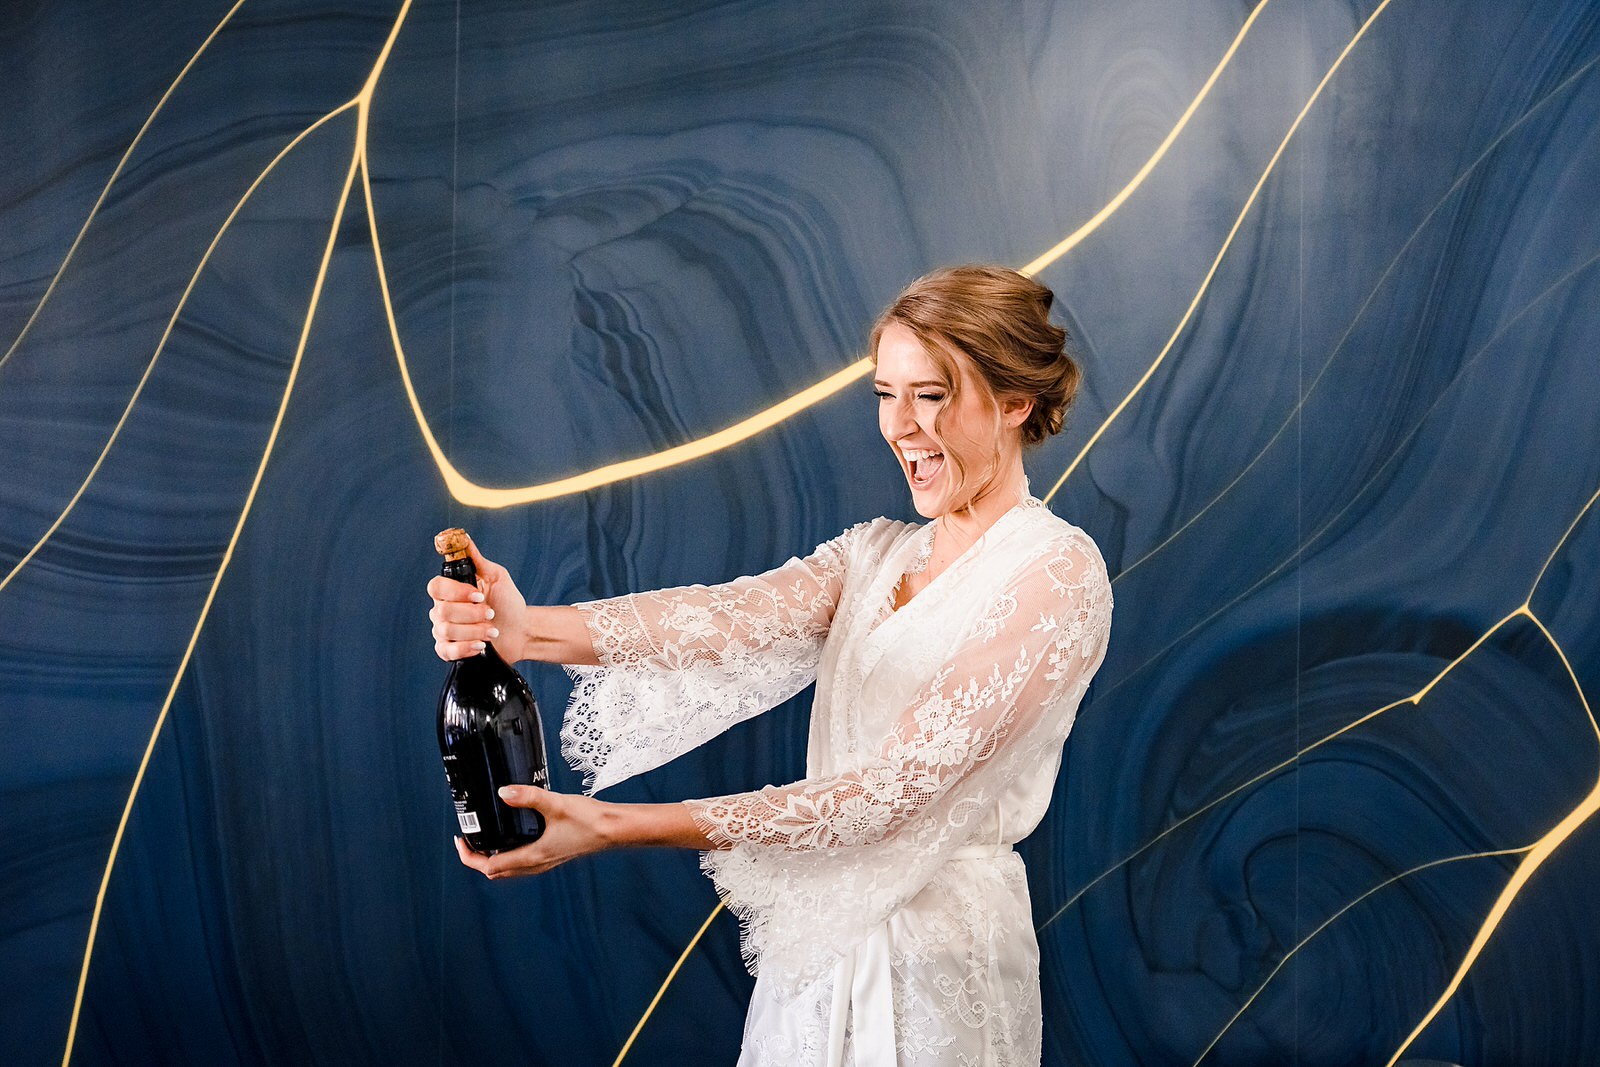 Make sure you pop your champagne before you put your wedding dress on. (you can pop some more later too!!!)